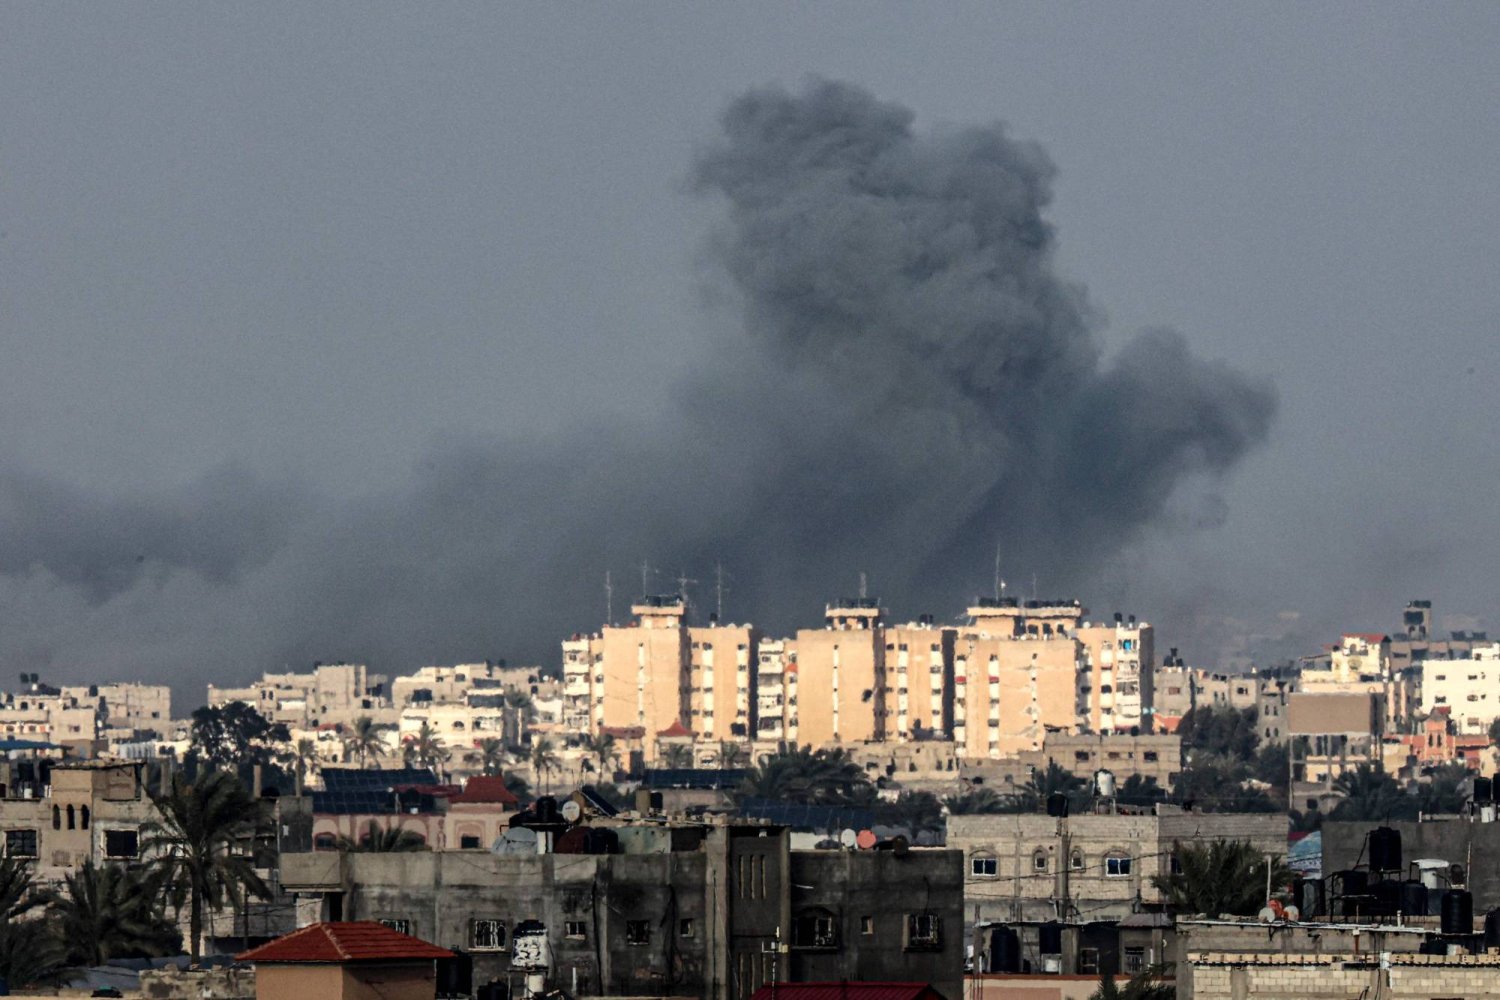 The Israeli missile attack on the Gaza Strip continues